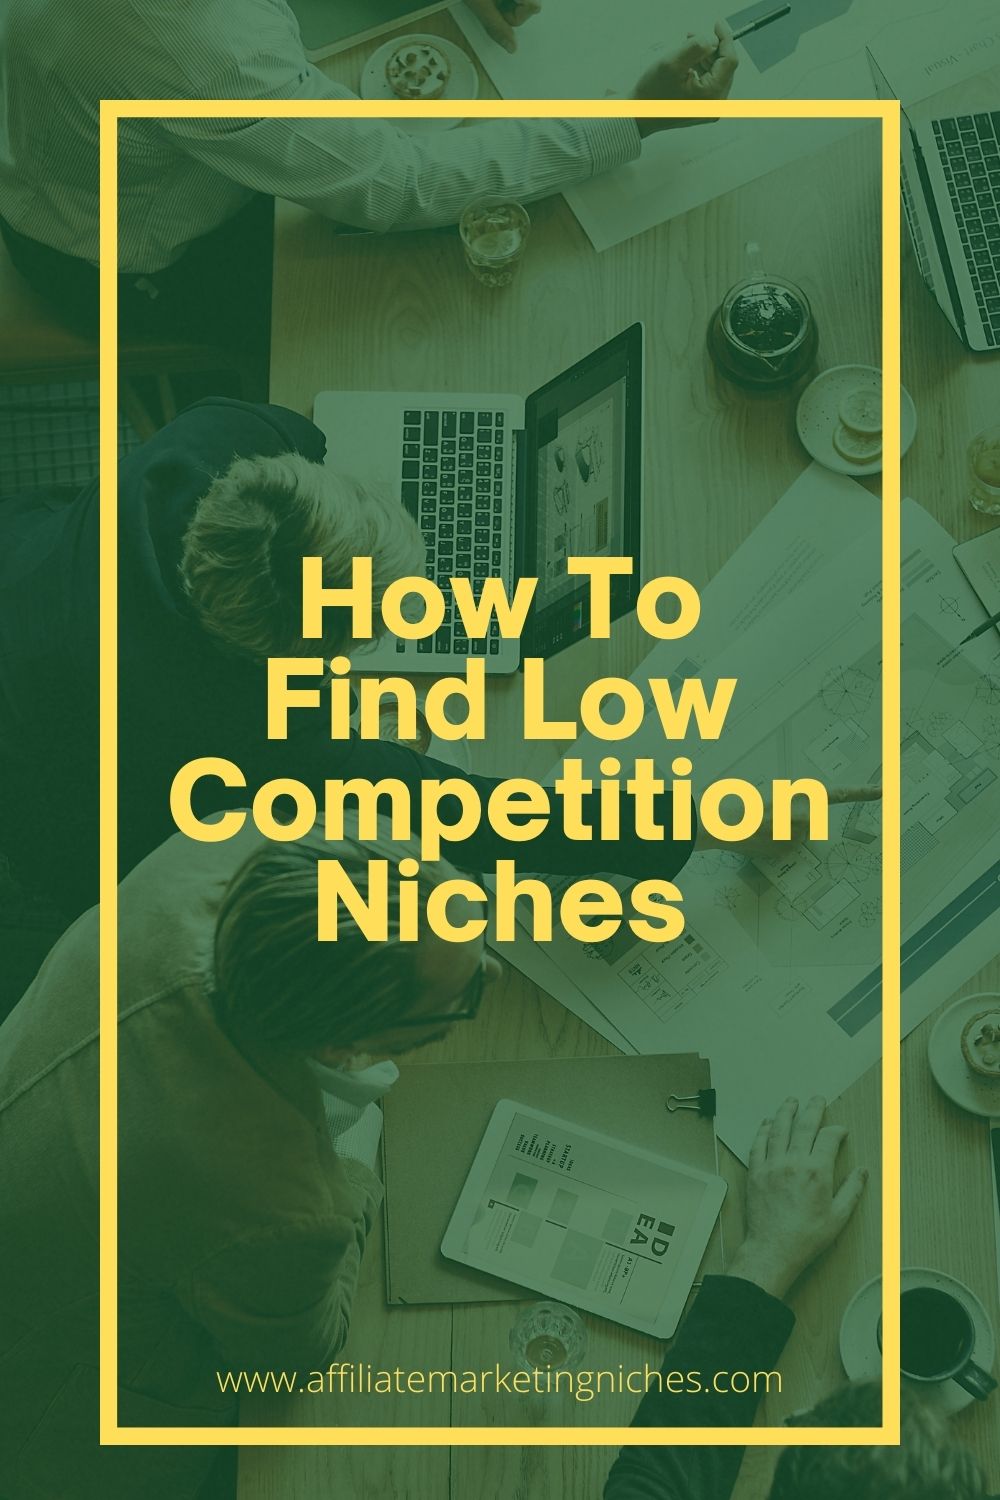 Methods for finding low competition niches